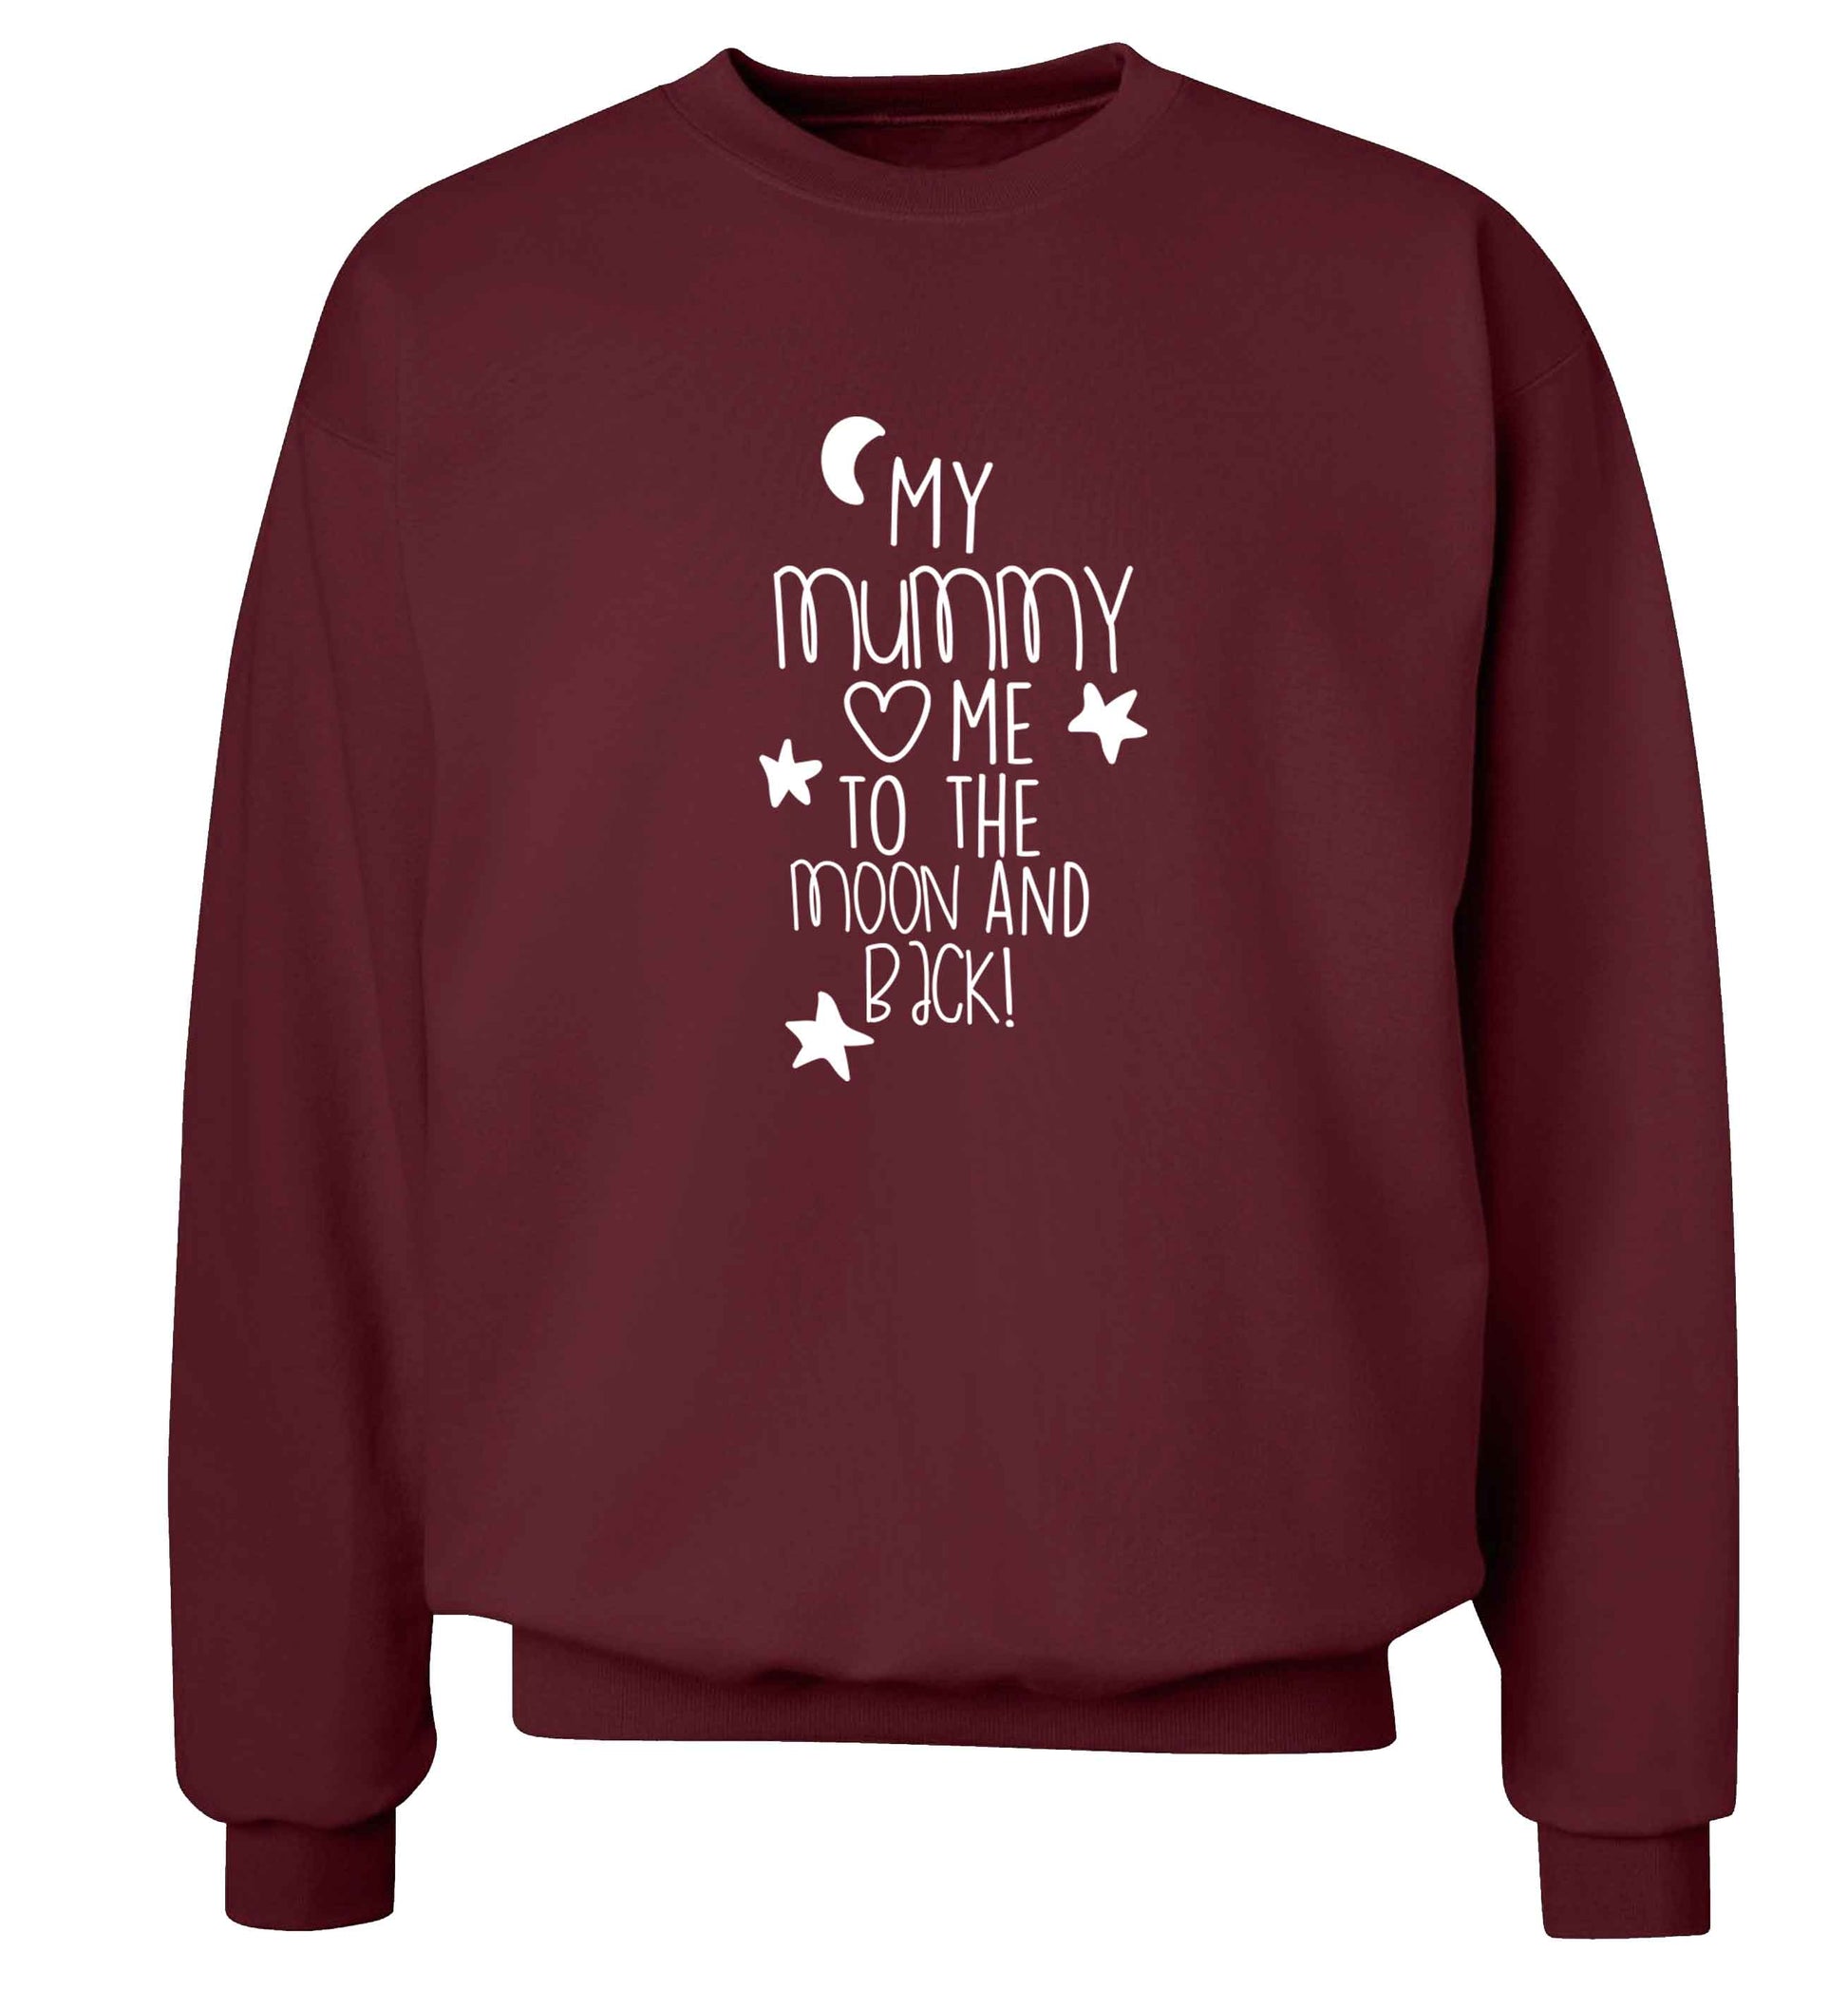 My mum loves me to the moon and back adult's unisex maroon sweater 2XL